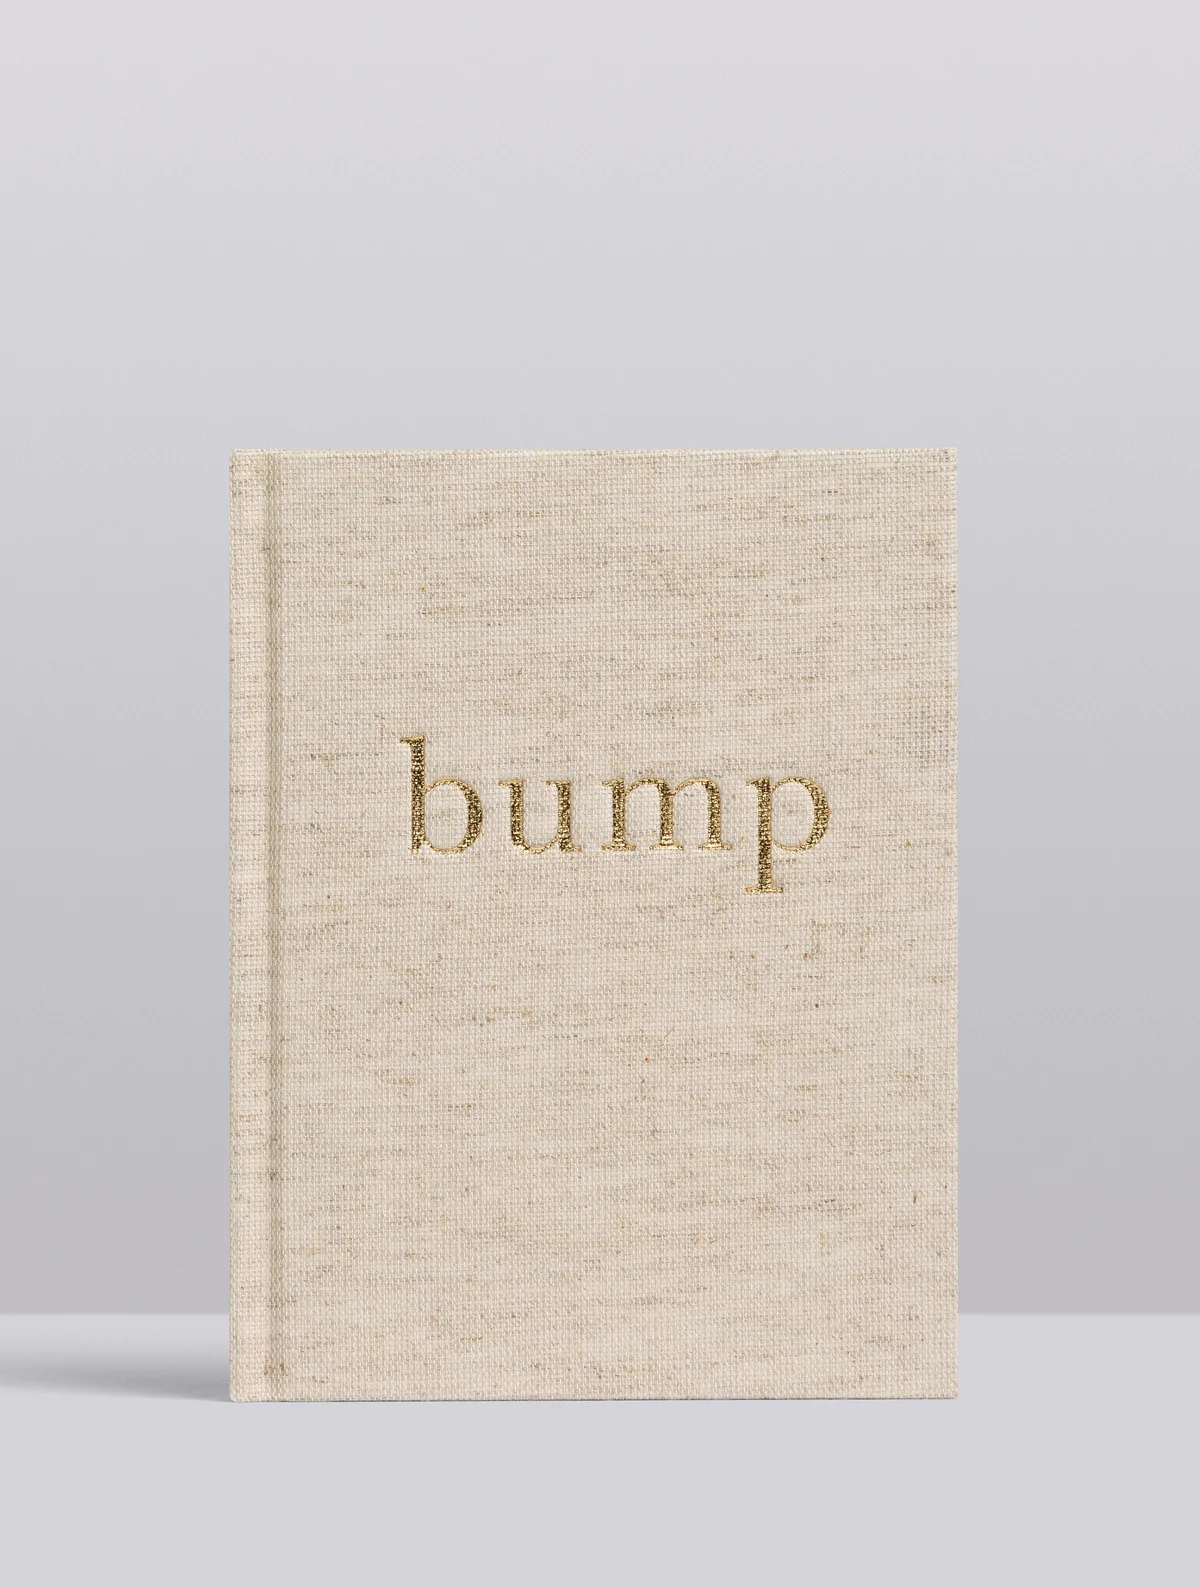 Write To Me Bump. A Pregnancy Story. Oatmeal Linen Cover